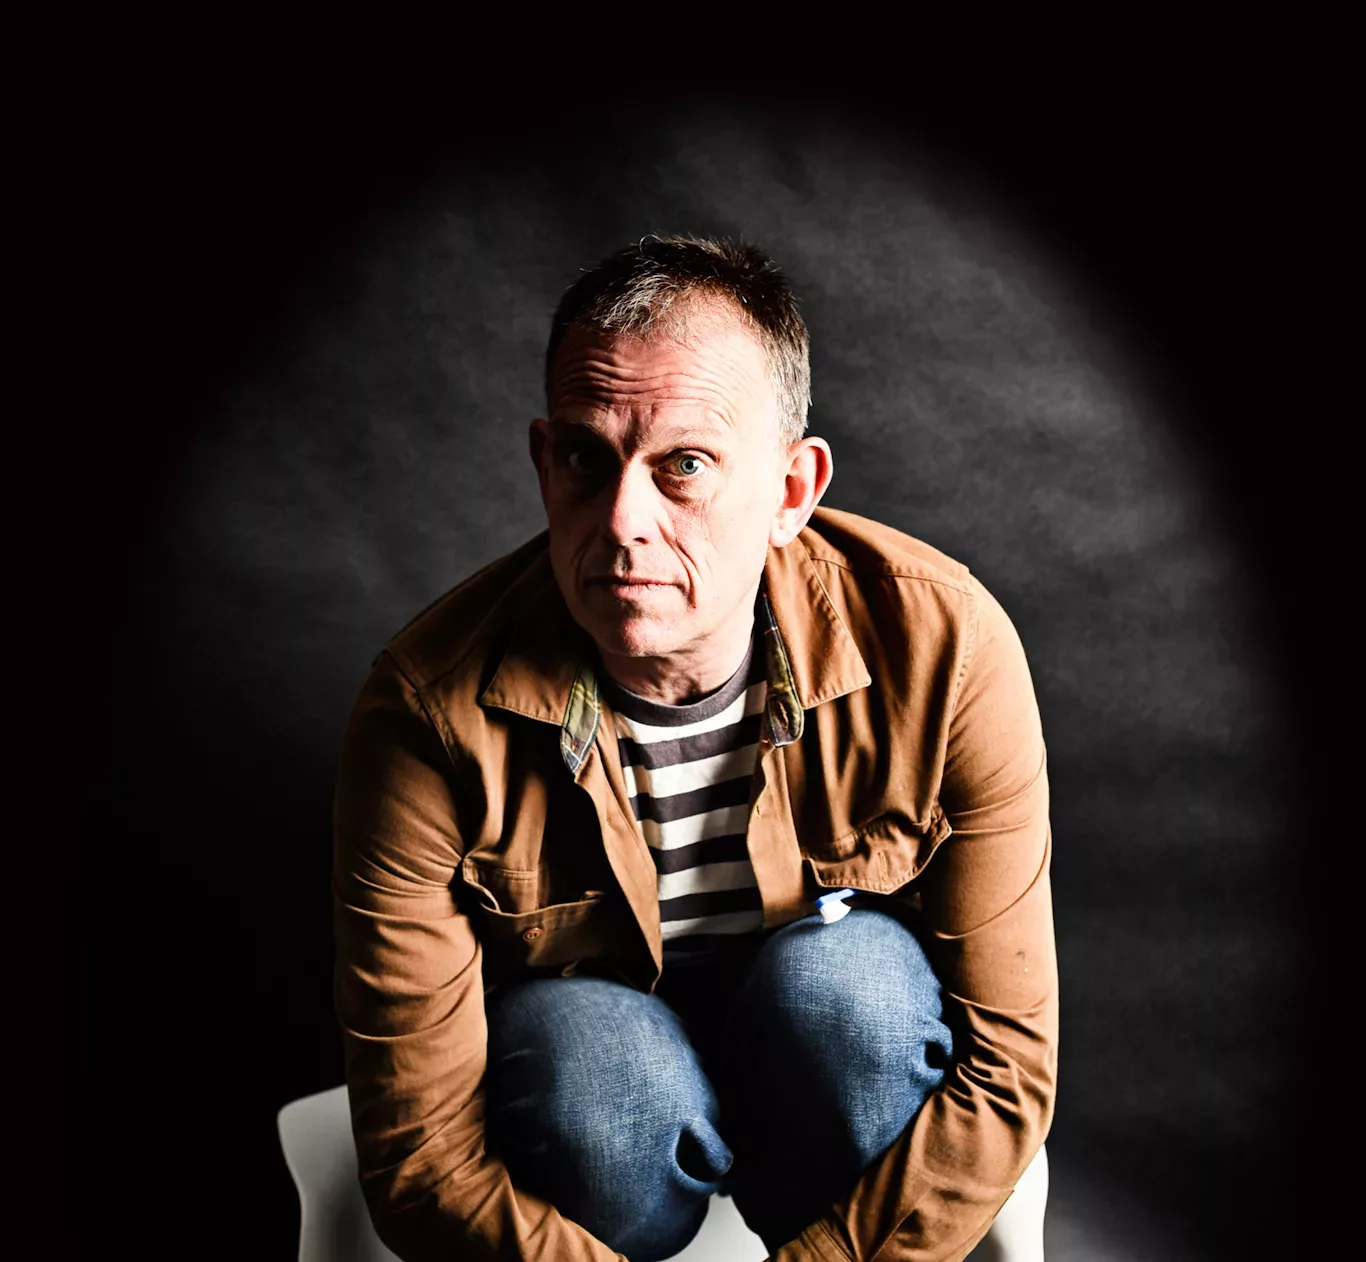 To. Hingley, frontman from the Inspiral Carpets.Malvern Rocks Gig Guide for Music in Malvern. Gigs, concerts, live music, open mic nights. Make Malvern your destination for music.